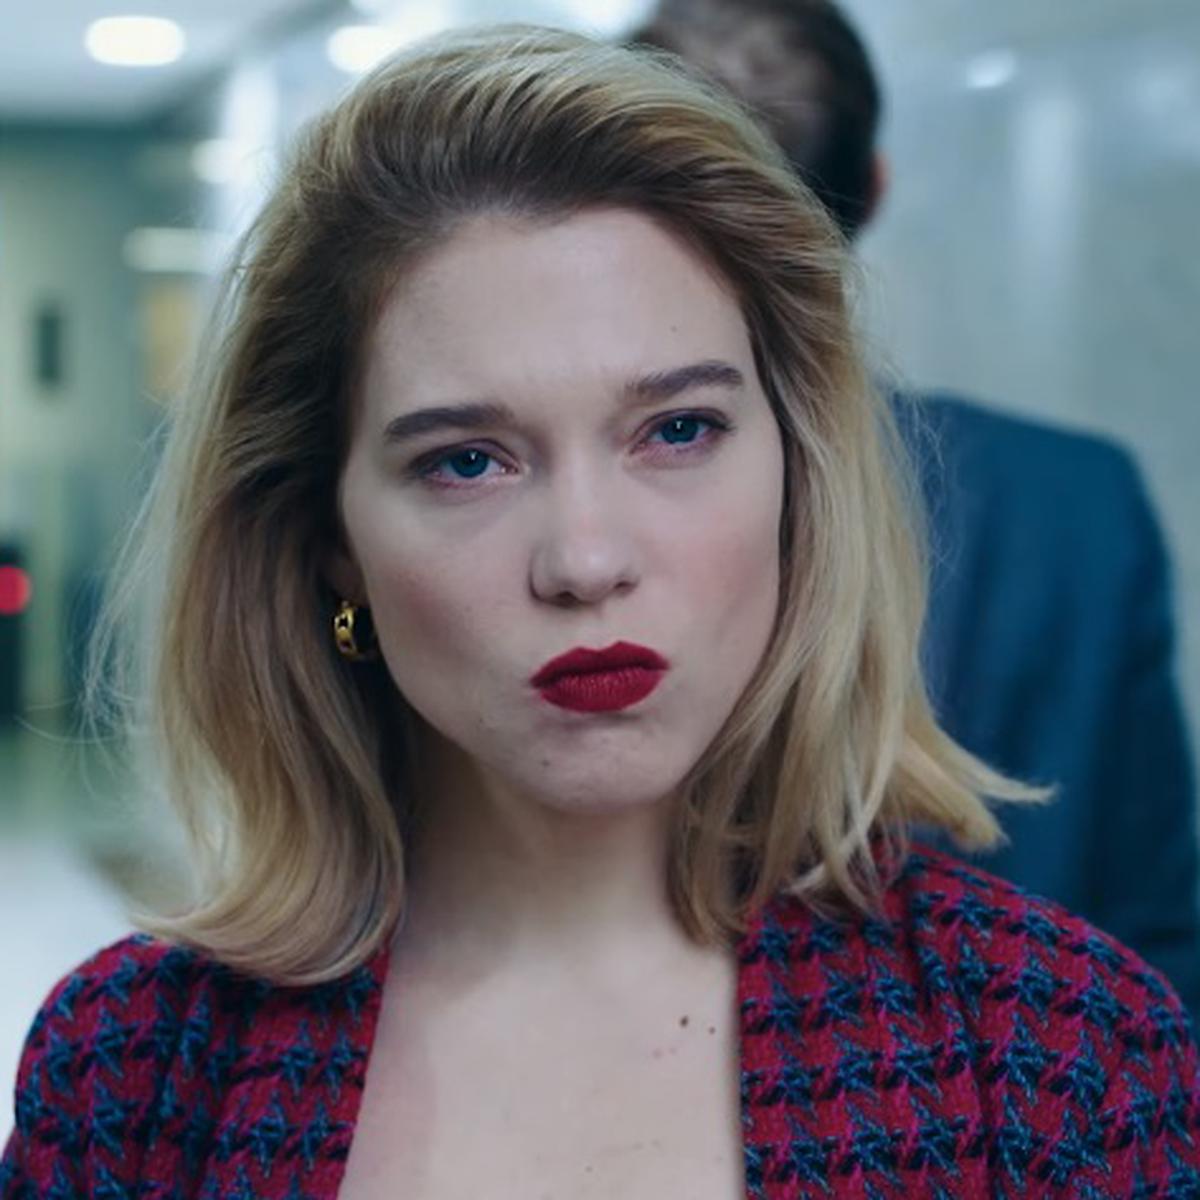 One Fine Morning review – Léa Seydoux sparkles in poignant drama